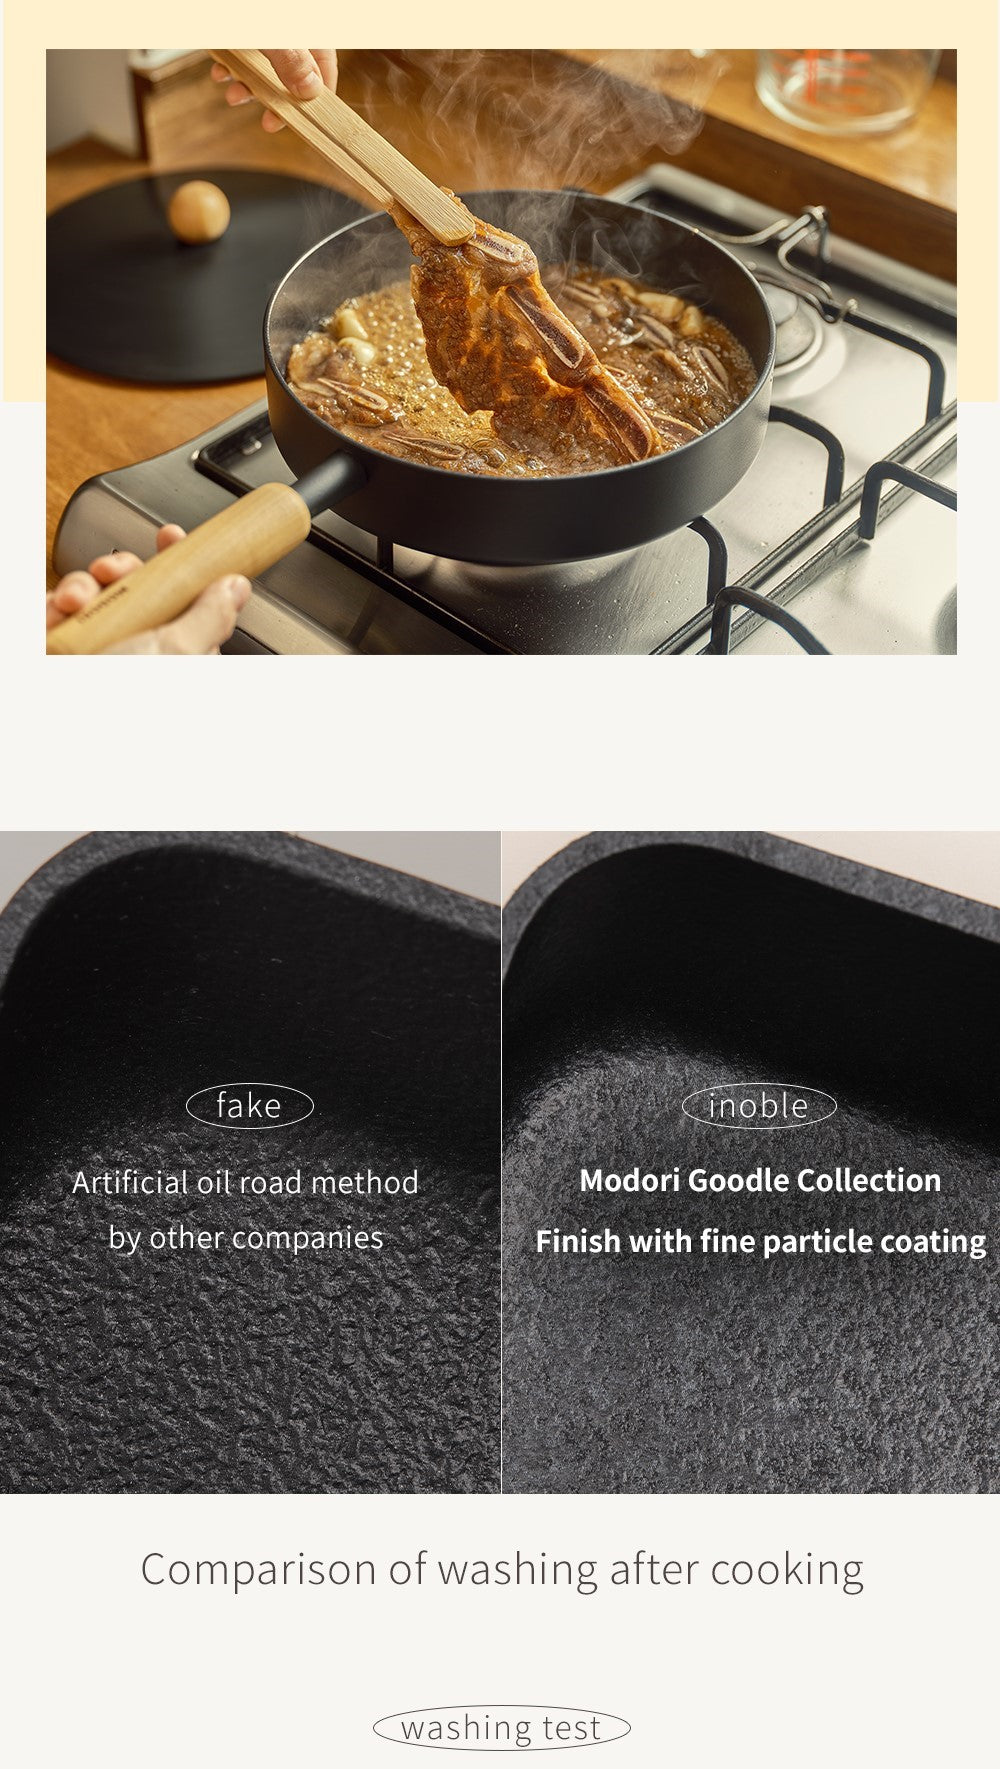 Modori Goodle Collection 24cm frying pan, you can additionally purchase the 24cm frying pan lid that is specially designed to match this frying pan if needed. The wider surface is designed to cook just about anything without worrying about ingredients slipping out of the pan, from frying fish and pasta to cooking steak, it's just perfect for everyday use. The Modori Goodle Collection is a brand new collection with clean lining and neat design, a black body and a wooden handle for a warm and contemporary feel, combines all the advantages of coated cookware, stainless steel cookware, and cast iron cookware, ideal for long-term durability performance. In this collection, we used a special Inoble coating patented oil method that enhances the non-stick effects and makes it easier to clean after use and requires minimal maintenance. It has the same heat retention effect as cast iron and is suitable for cooking with various stoves, such as gas stoves, induction cookers (except ferromagnetic induction cookers), ceramic cookers, and heating plates.